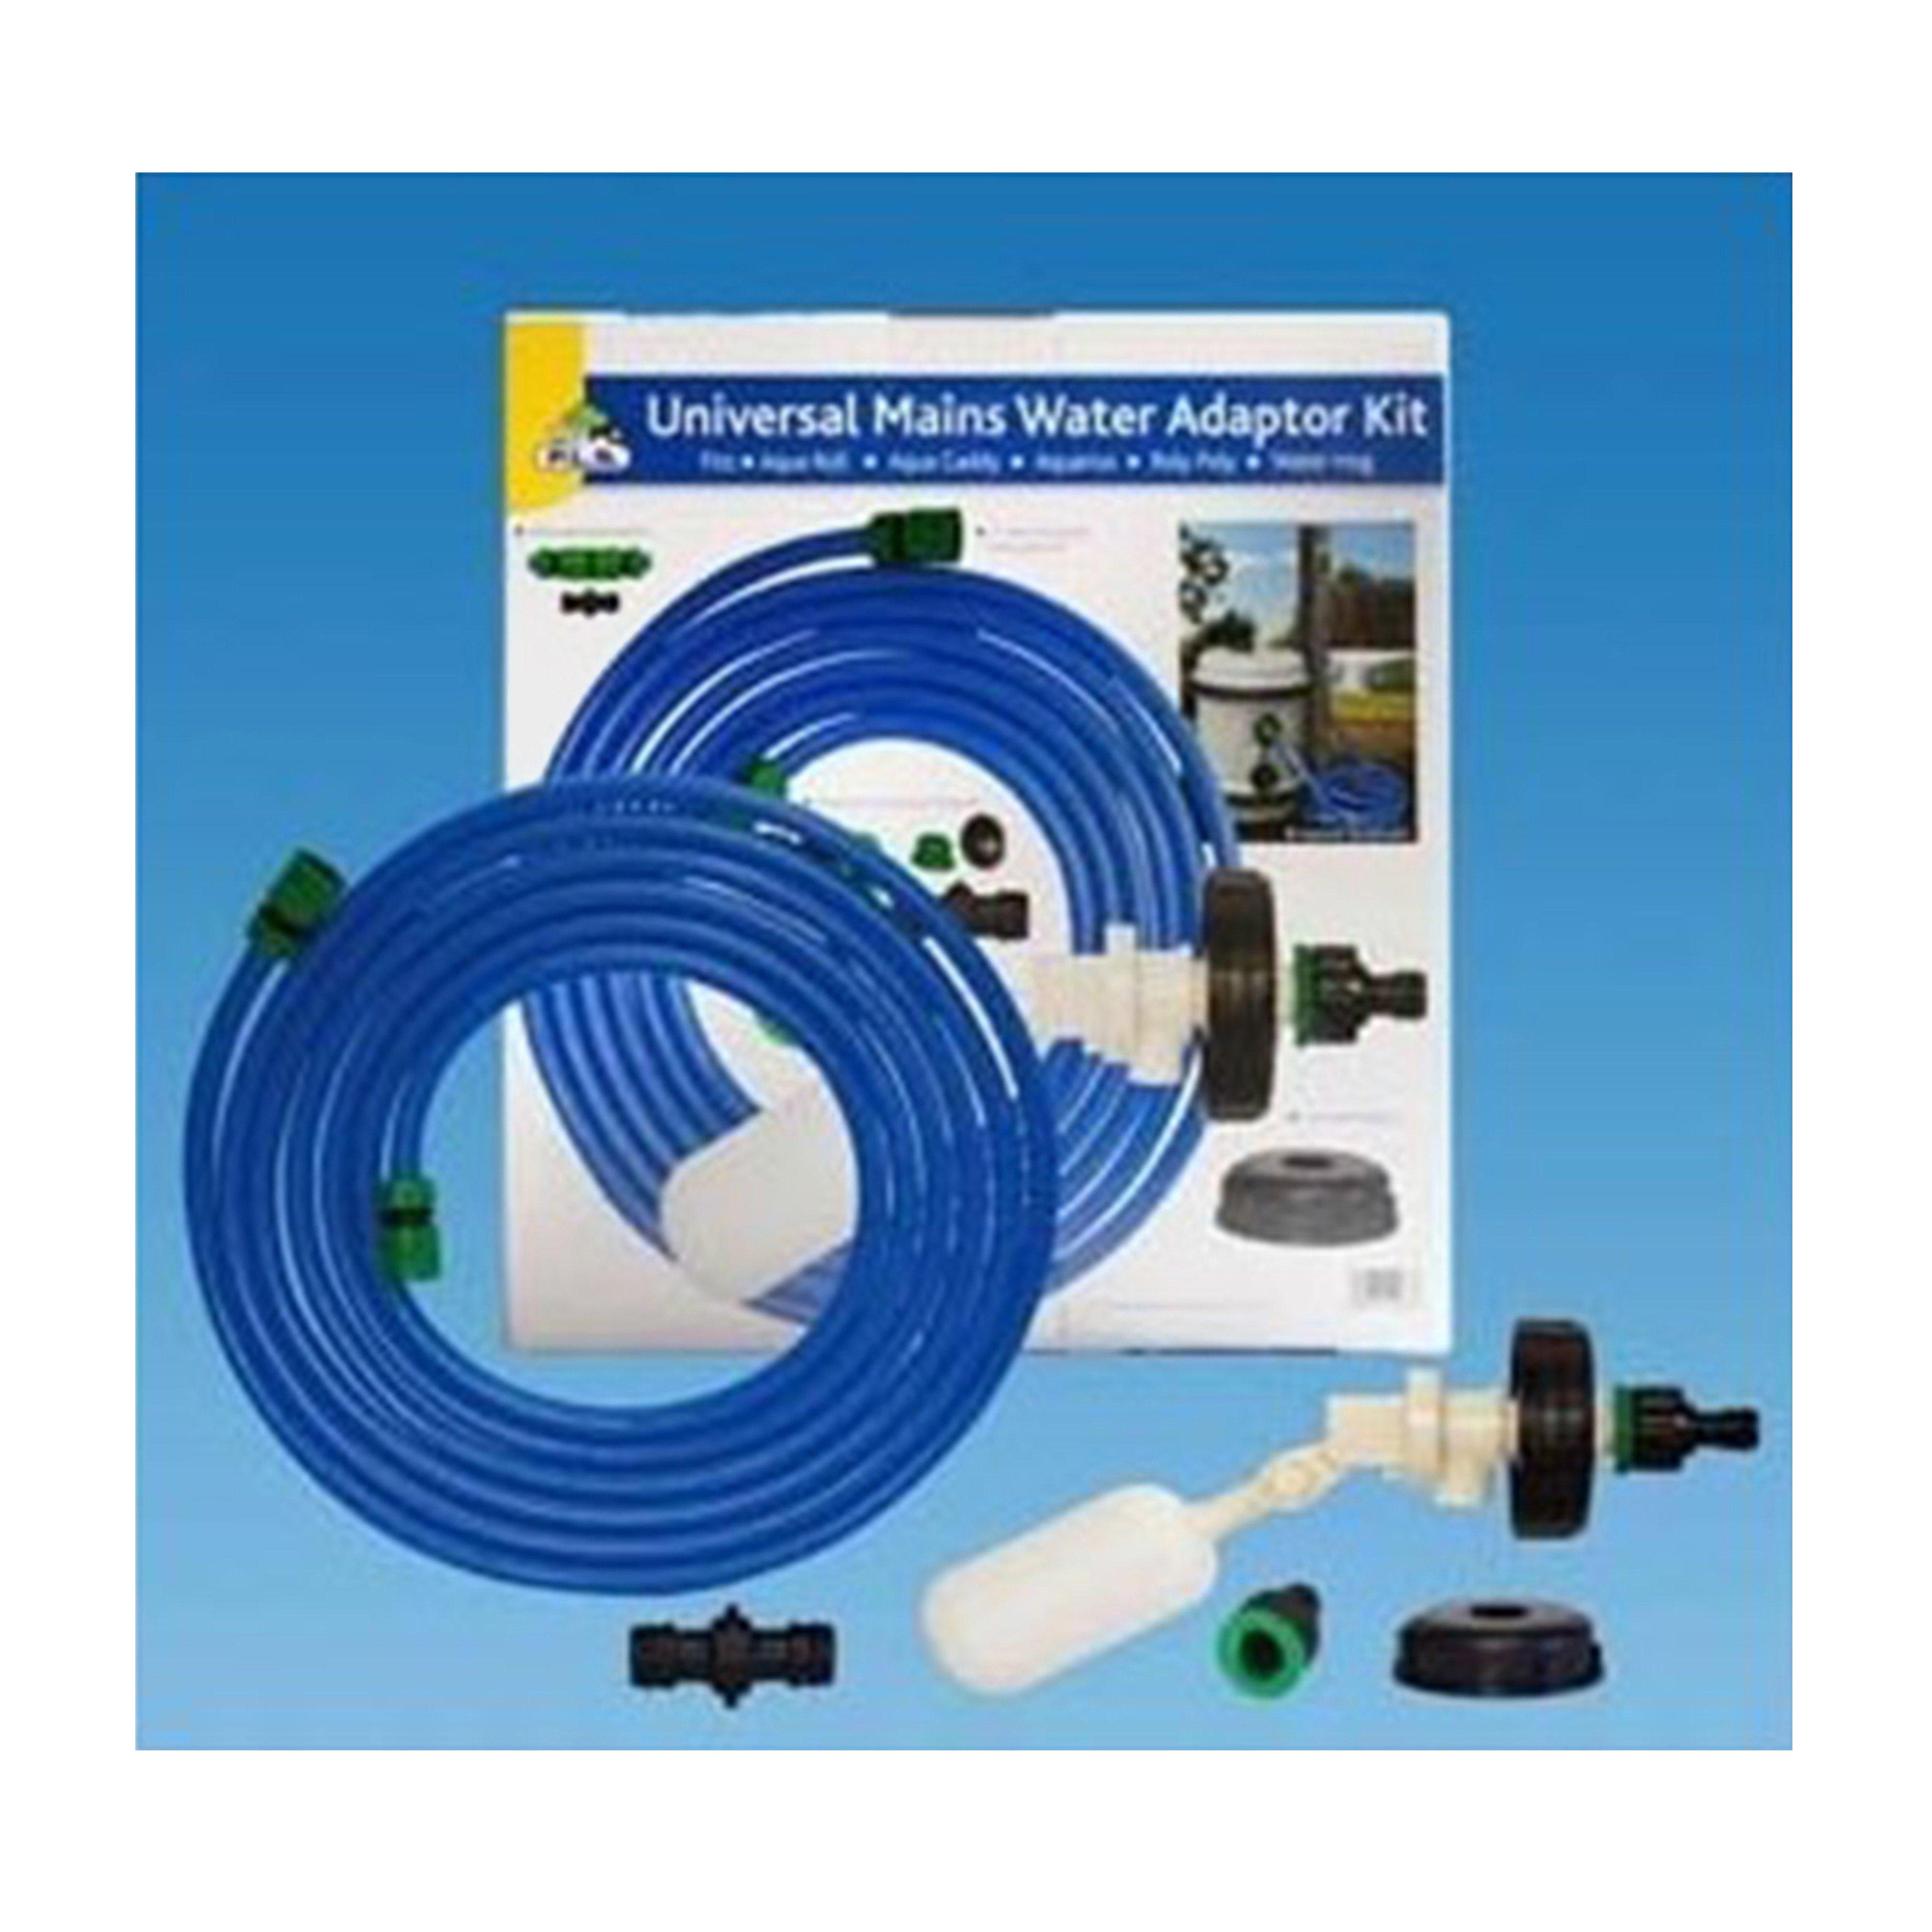 Pennine Universal Mains Water Adapter Kit Review